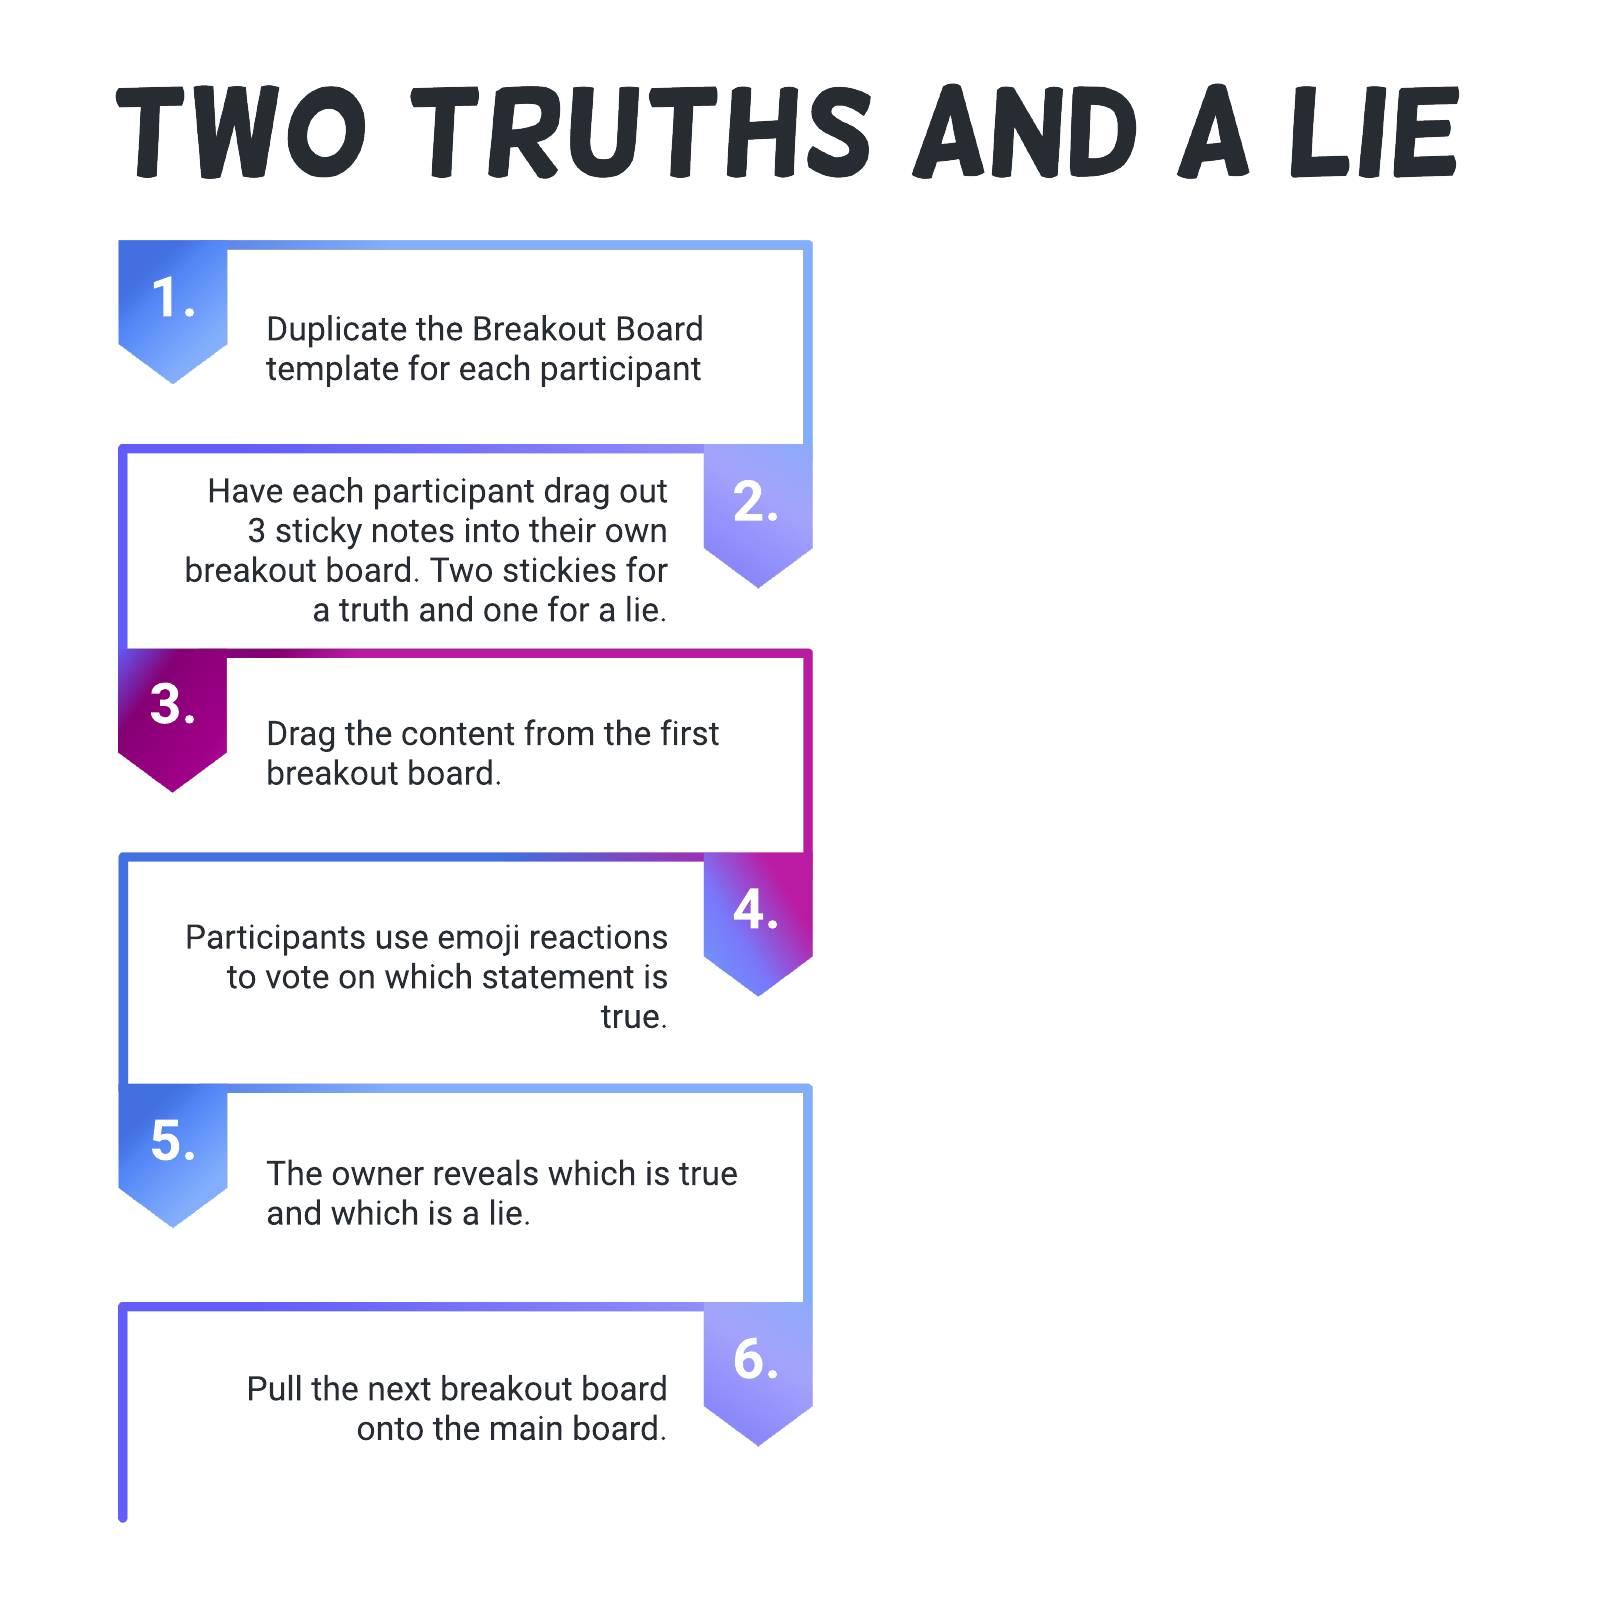 Two Truths and a Lie example